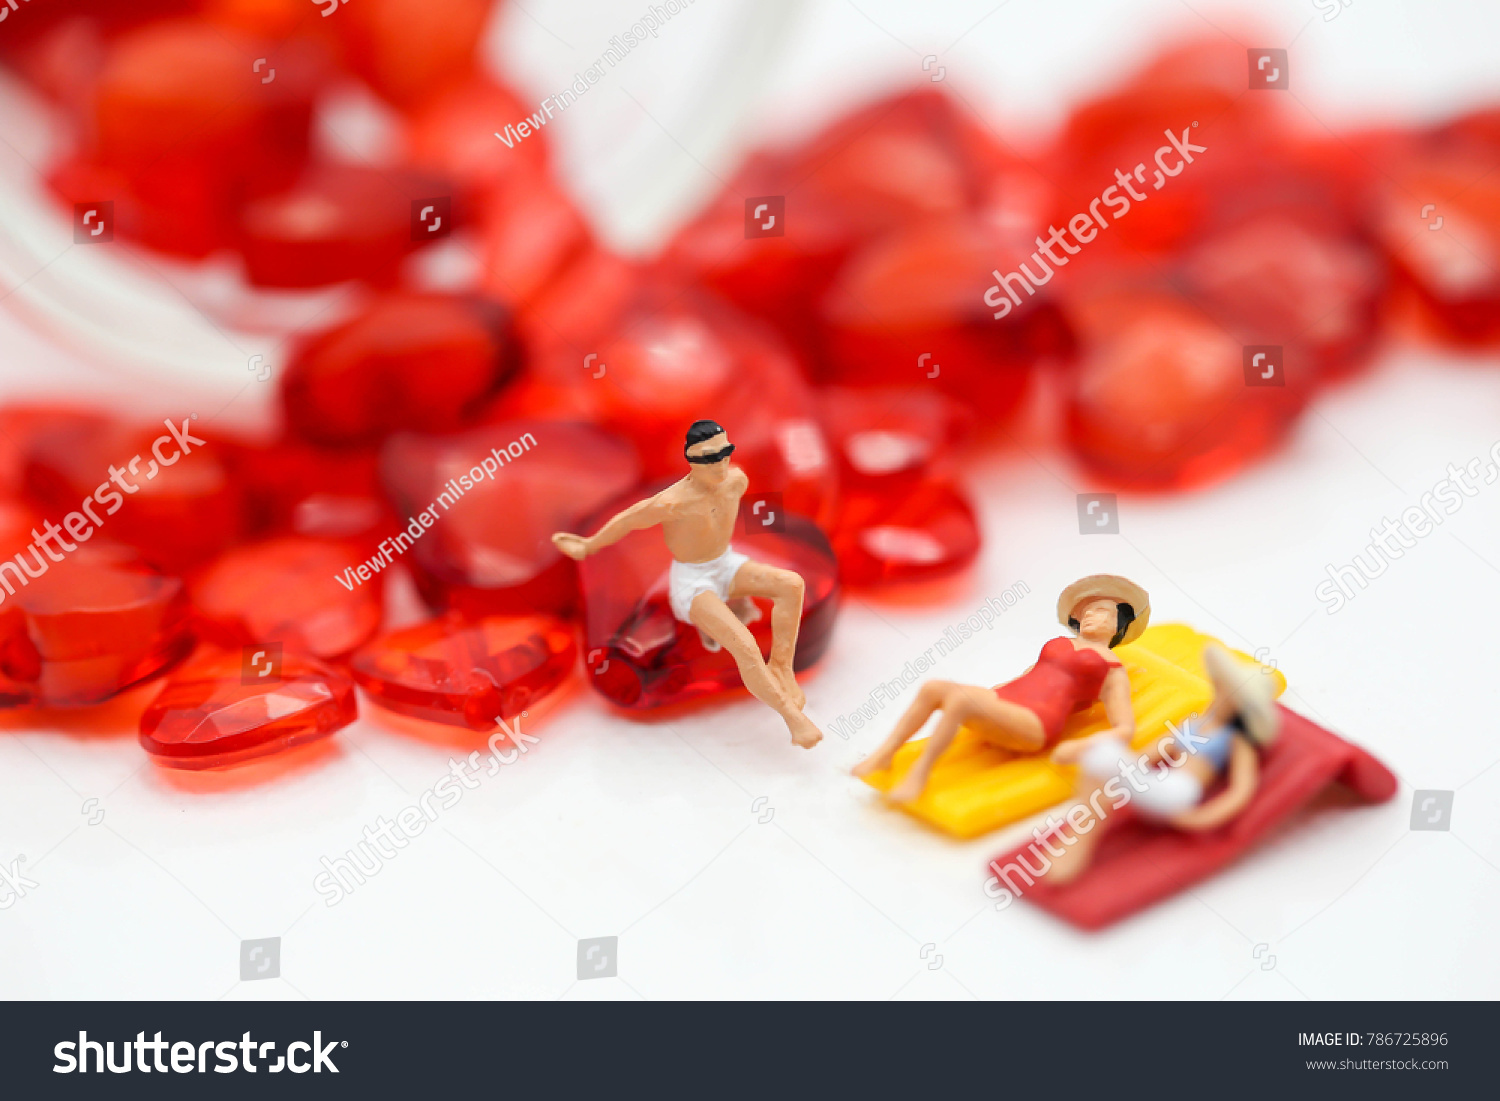 miniature people : wearing swimsuit relaxing with red heart,lover concept #786725896